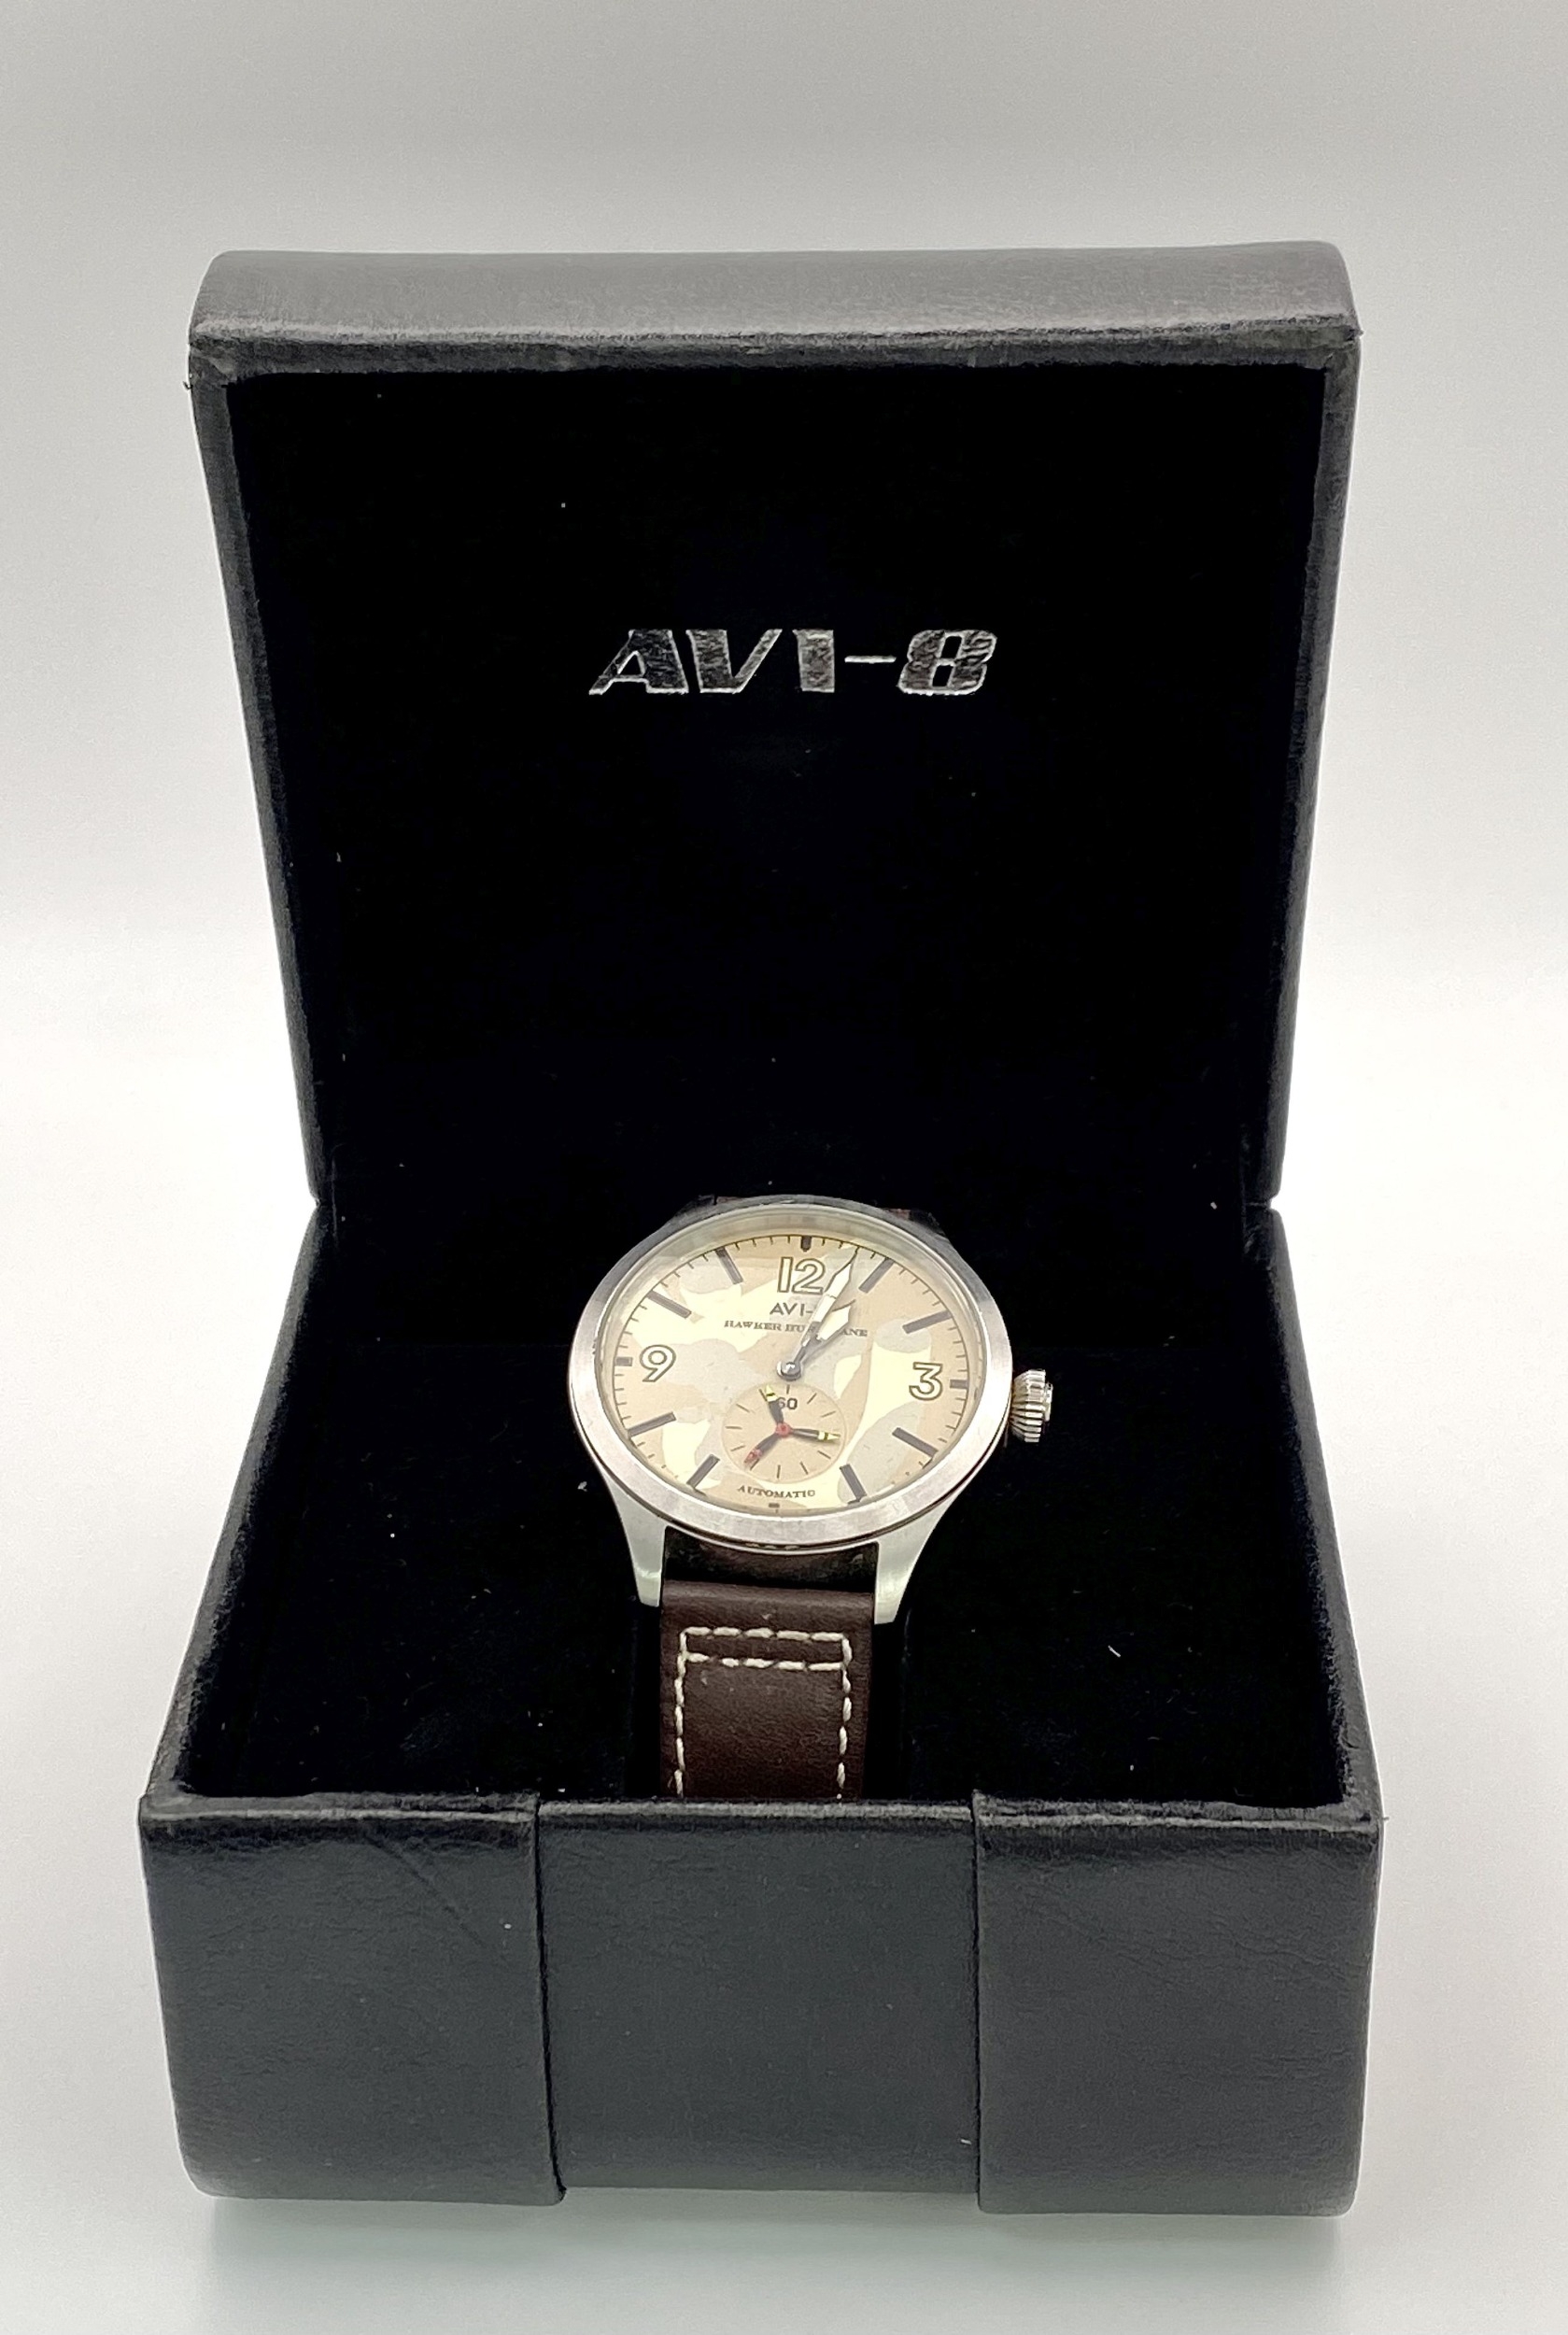 A Men’s ‘Hawker Hurricane’ Automatic Pilots Watch by AVI8. 47mm Including Crown. Full Working Order. - Image 9 of 9